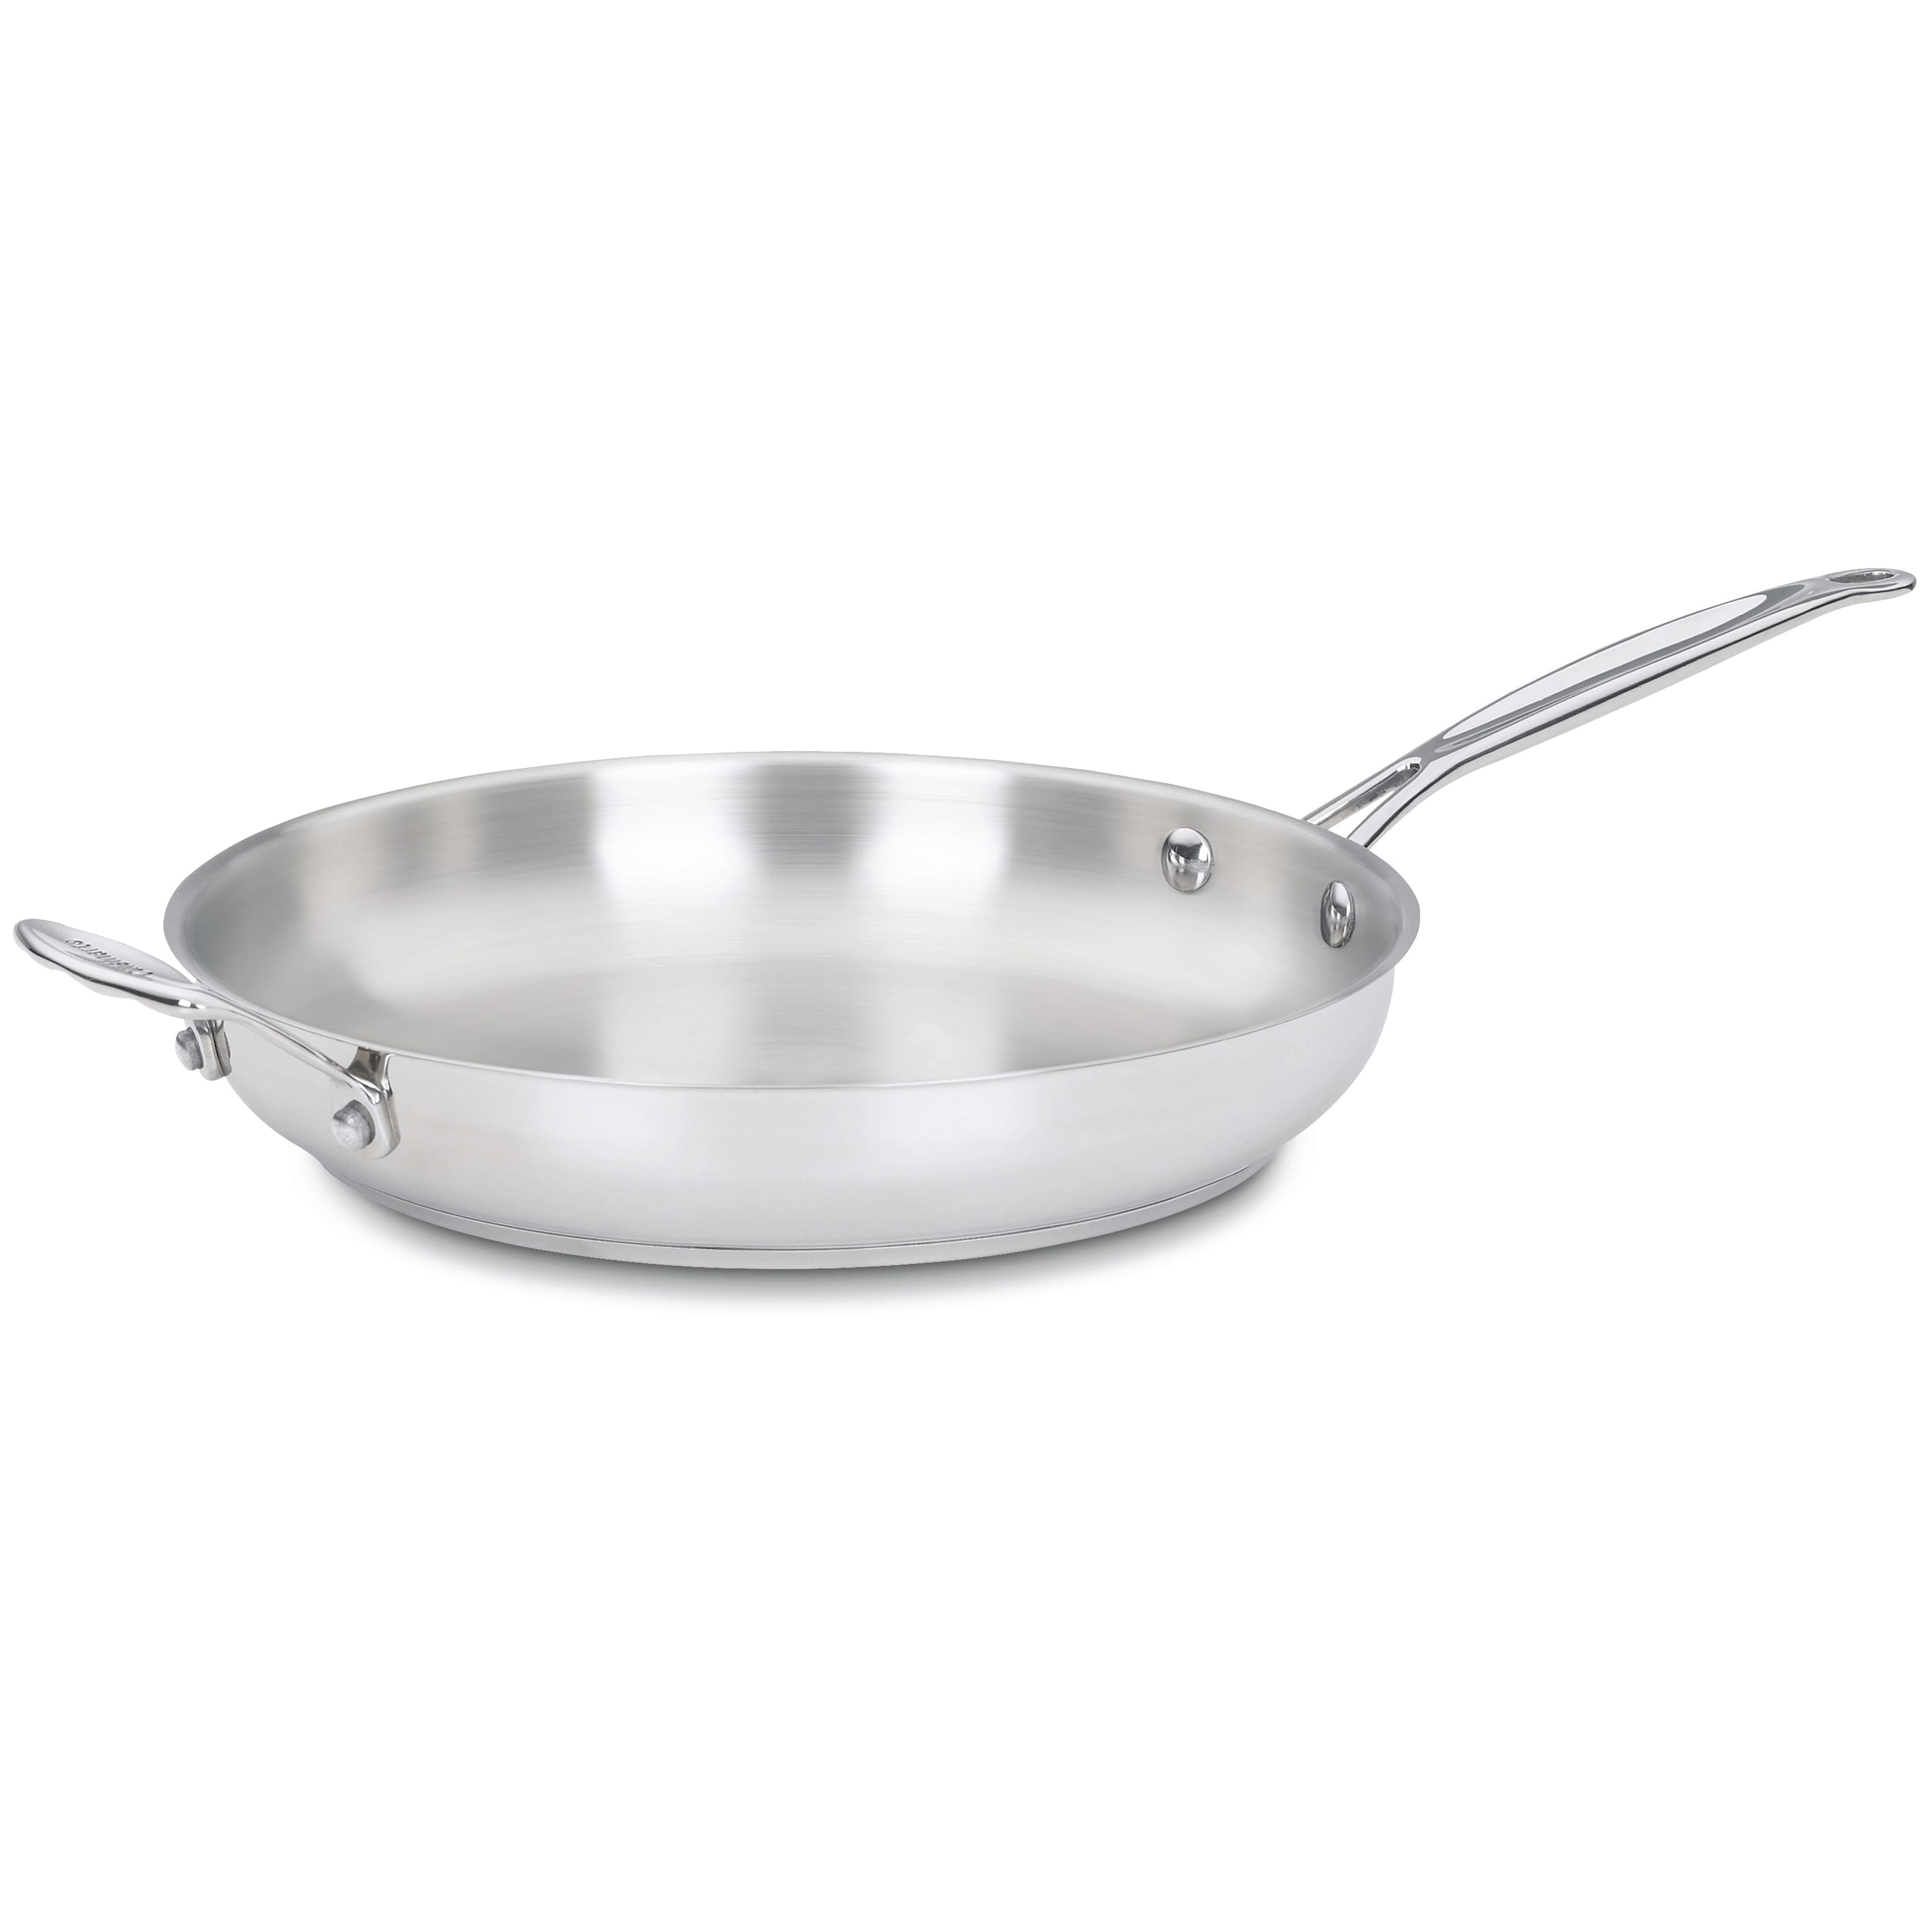 https://ak1.ostkcdn.com/images/products/14154203/Cuisinart-722-30H-Chefs-Classic-Stainless-12-Inch-Open-Skillet-with-Helper-Handle-5295b21b-91ed-4ca0-978a-7b235f65cdaa.jpg